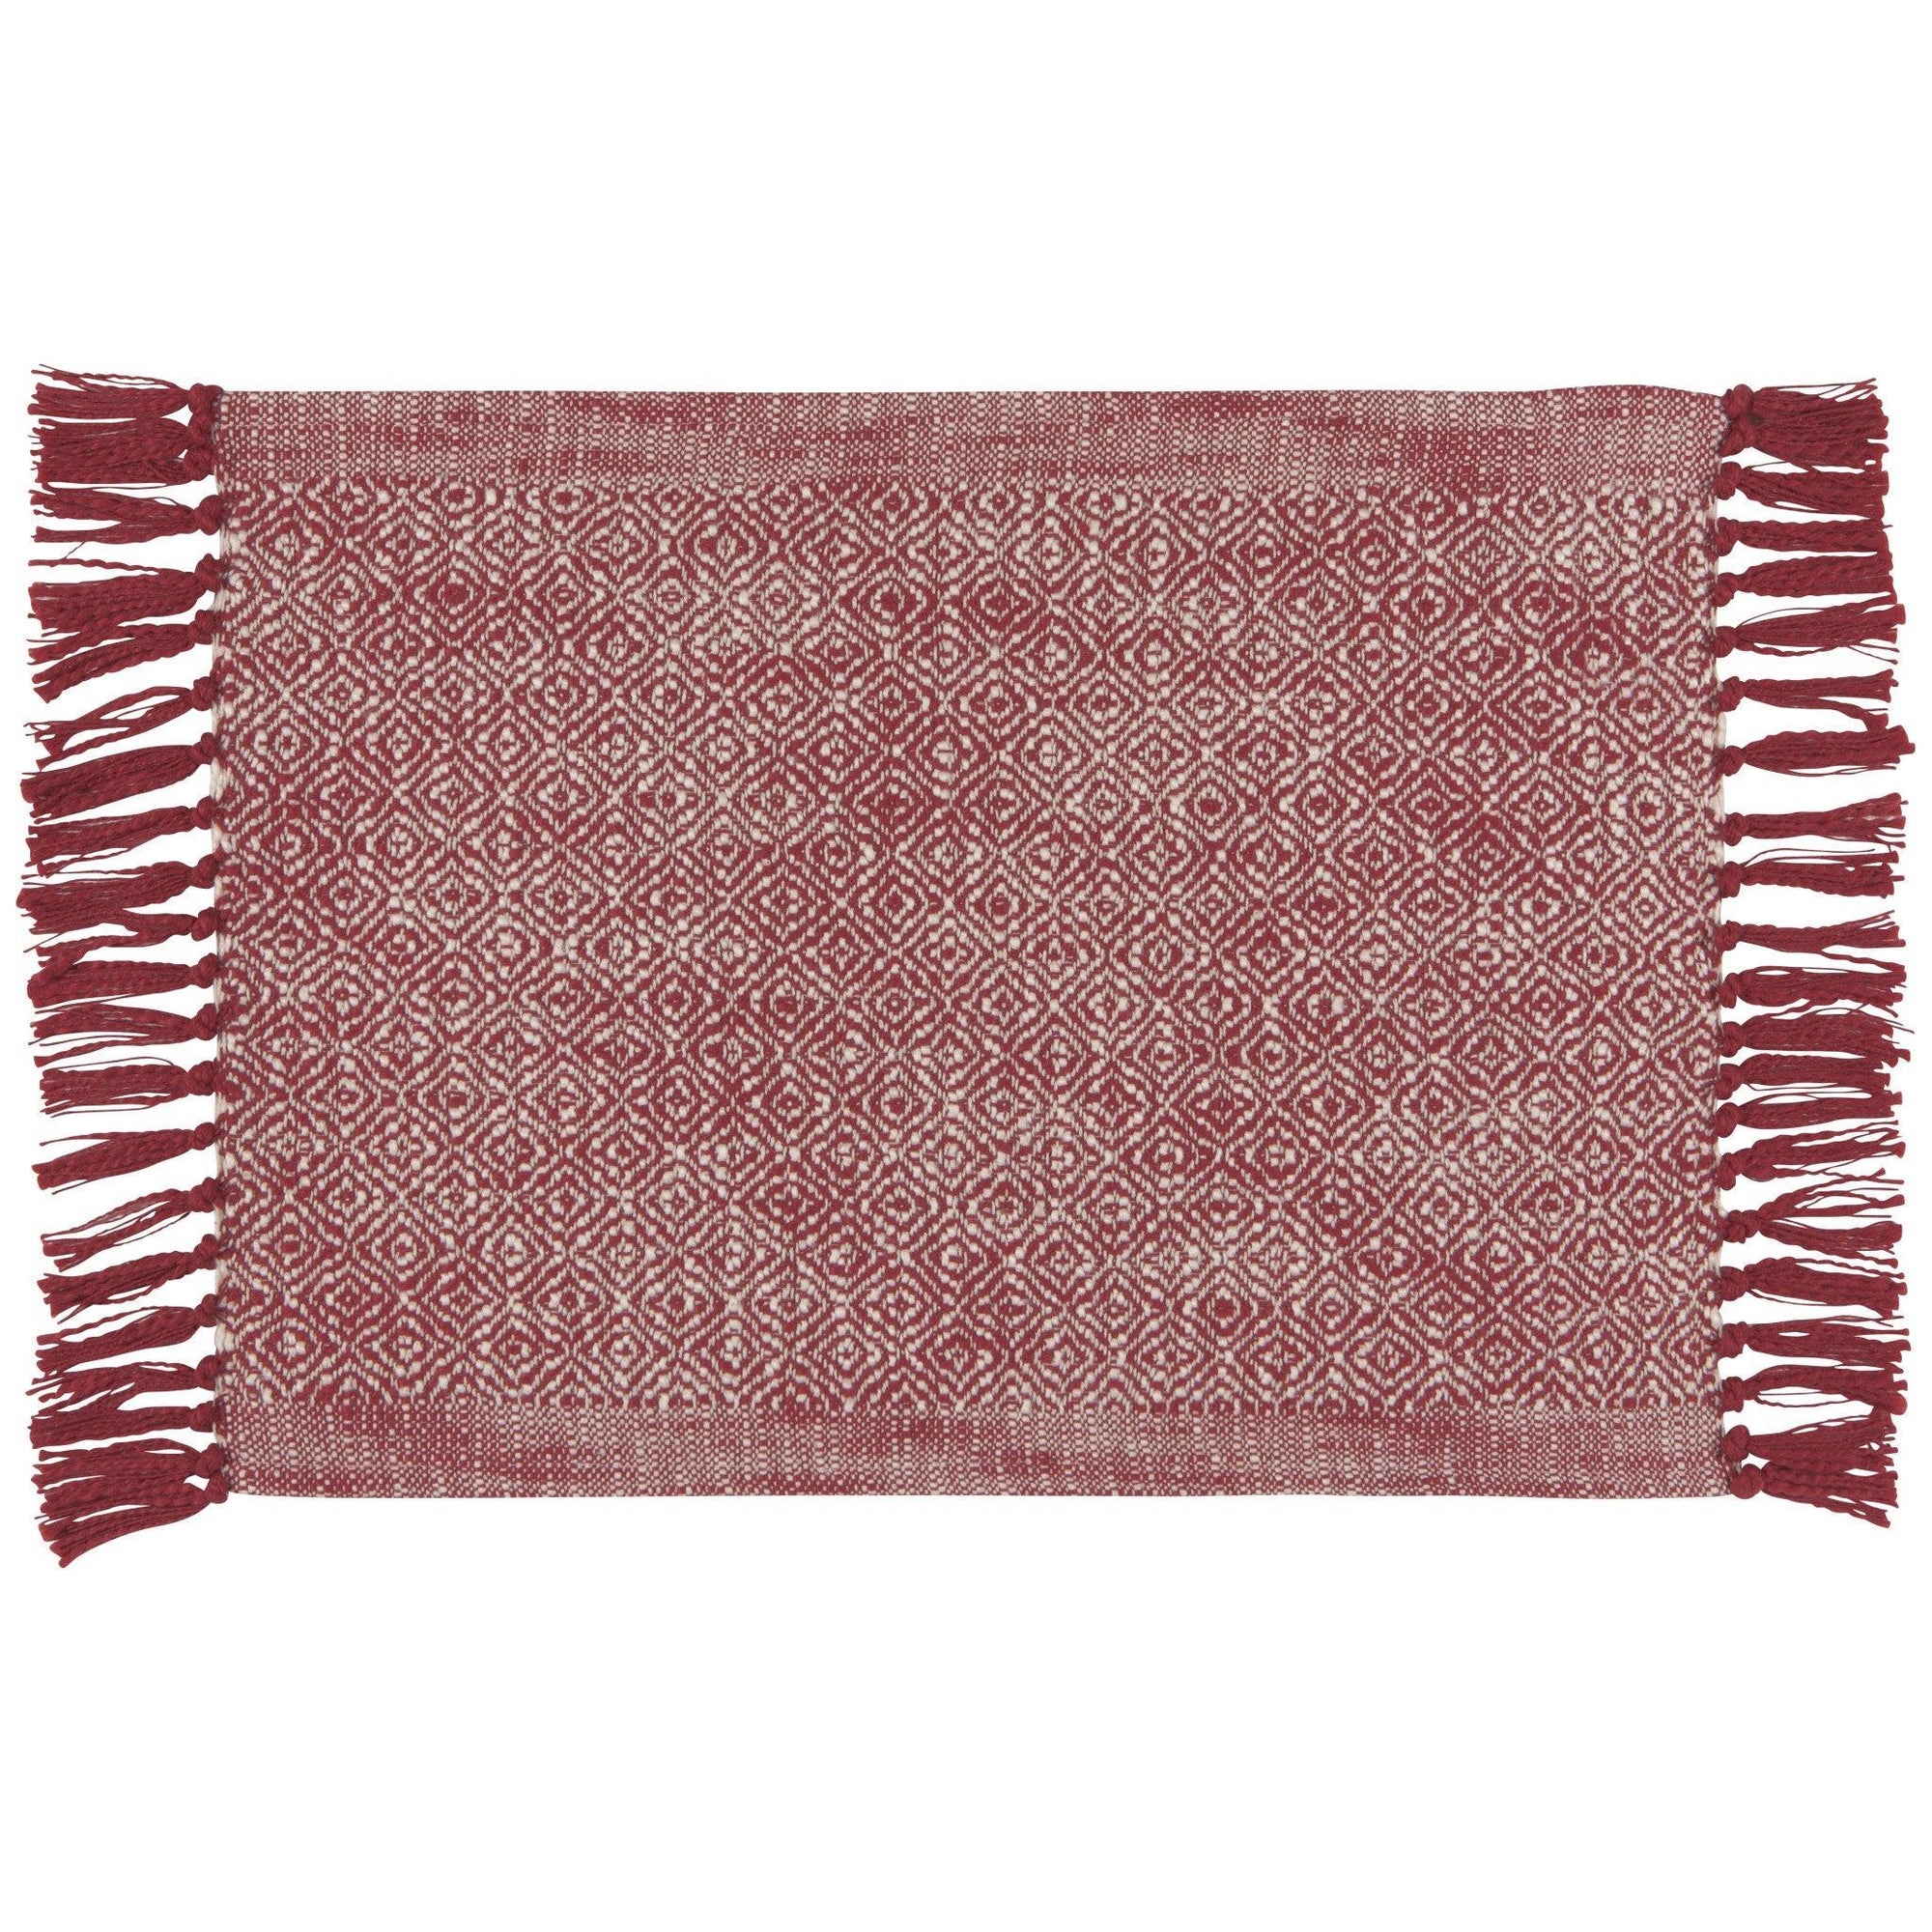 Danica Heirloom Hearthside Placemat Chili Red